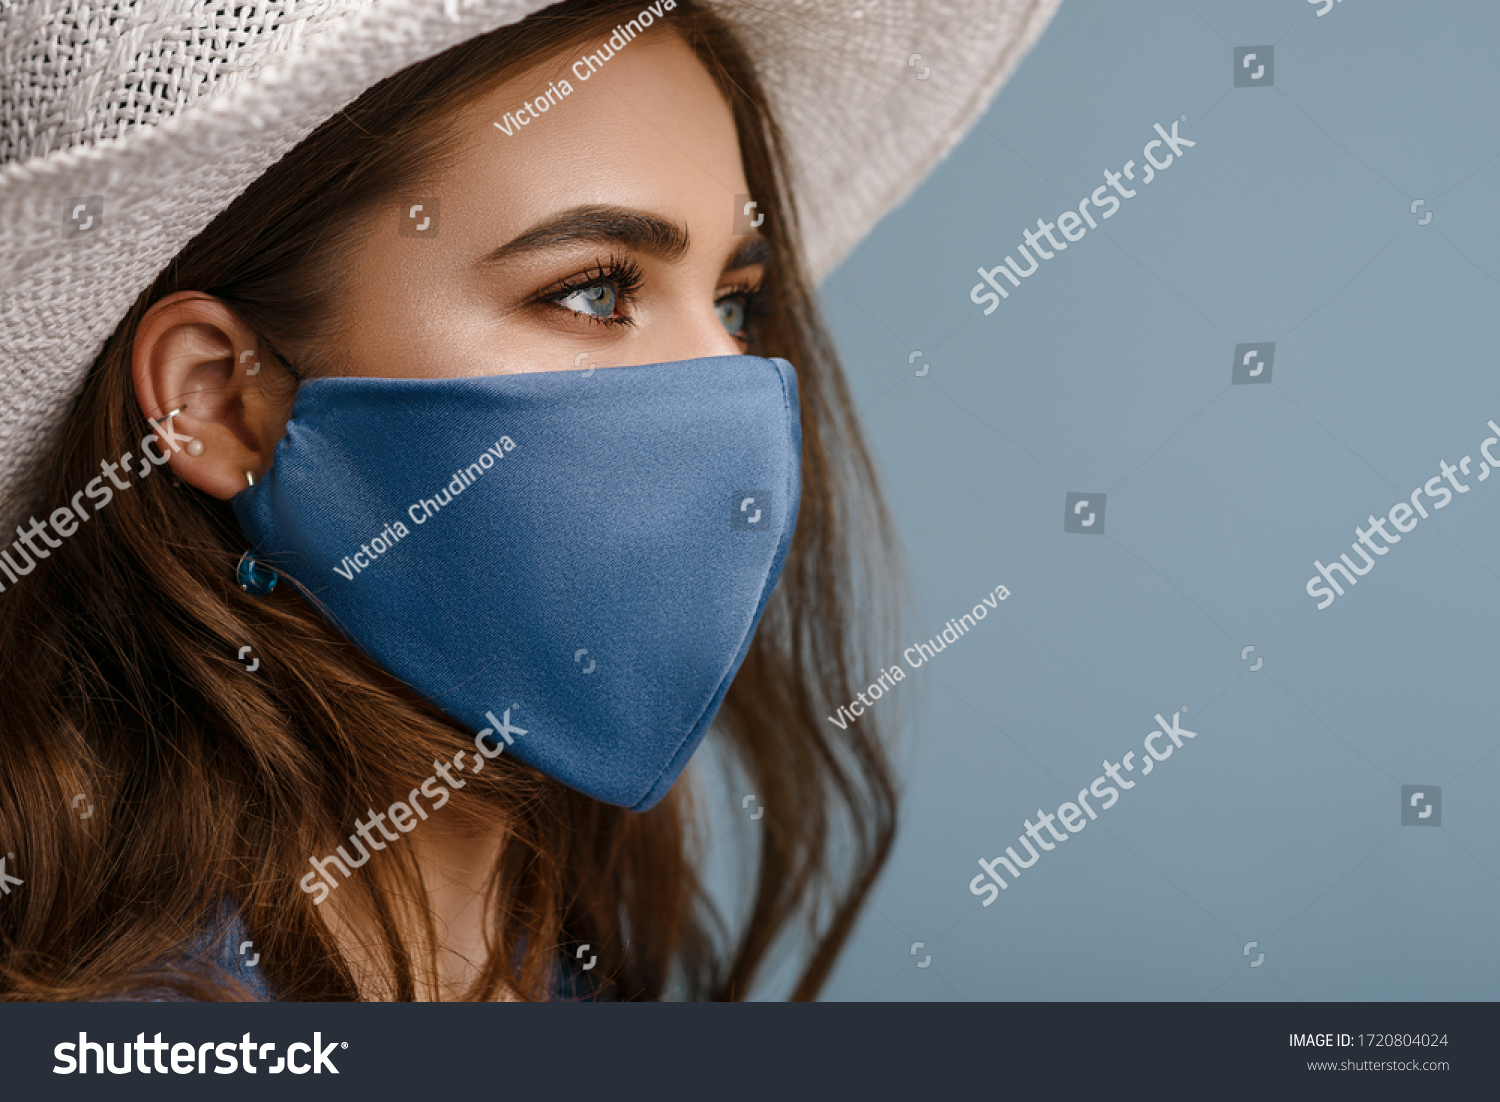 Woman wearing stylish protective face mask, posing on blue background. Trendy Fashion accessory during quarantine of coronavirus pandemic. Close up studio portrait. Copy, empty space for text #1720804024